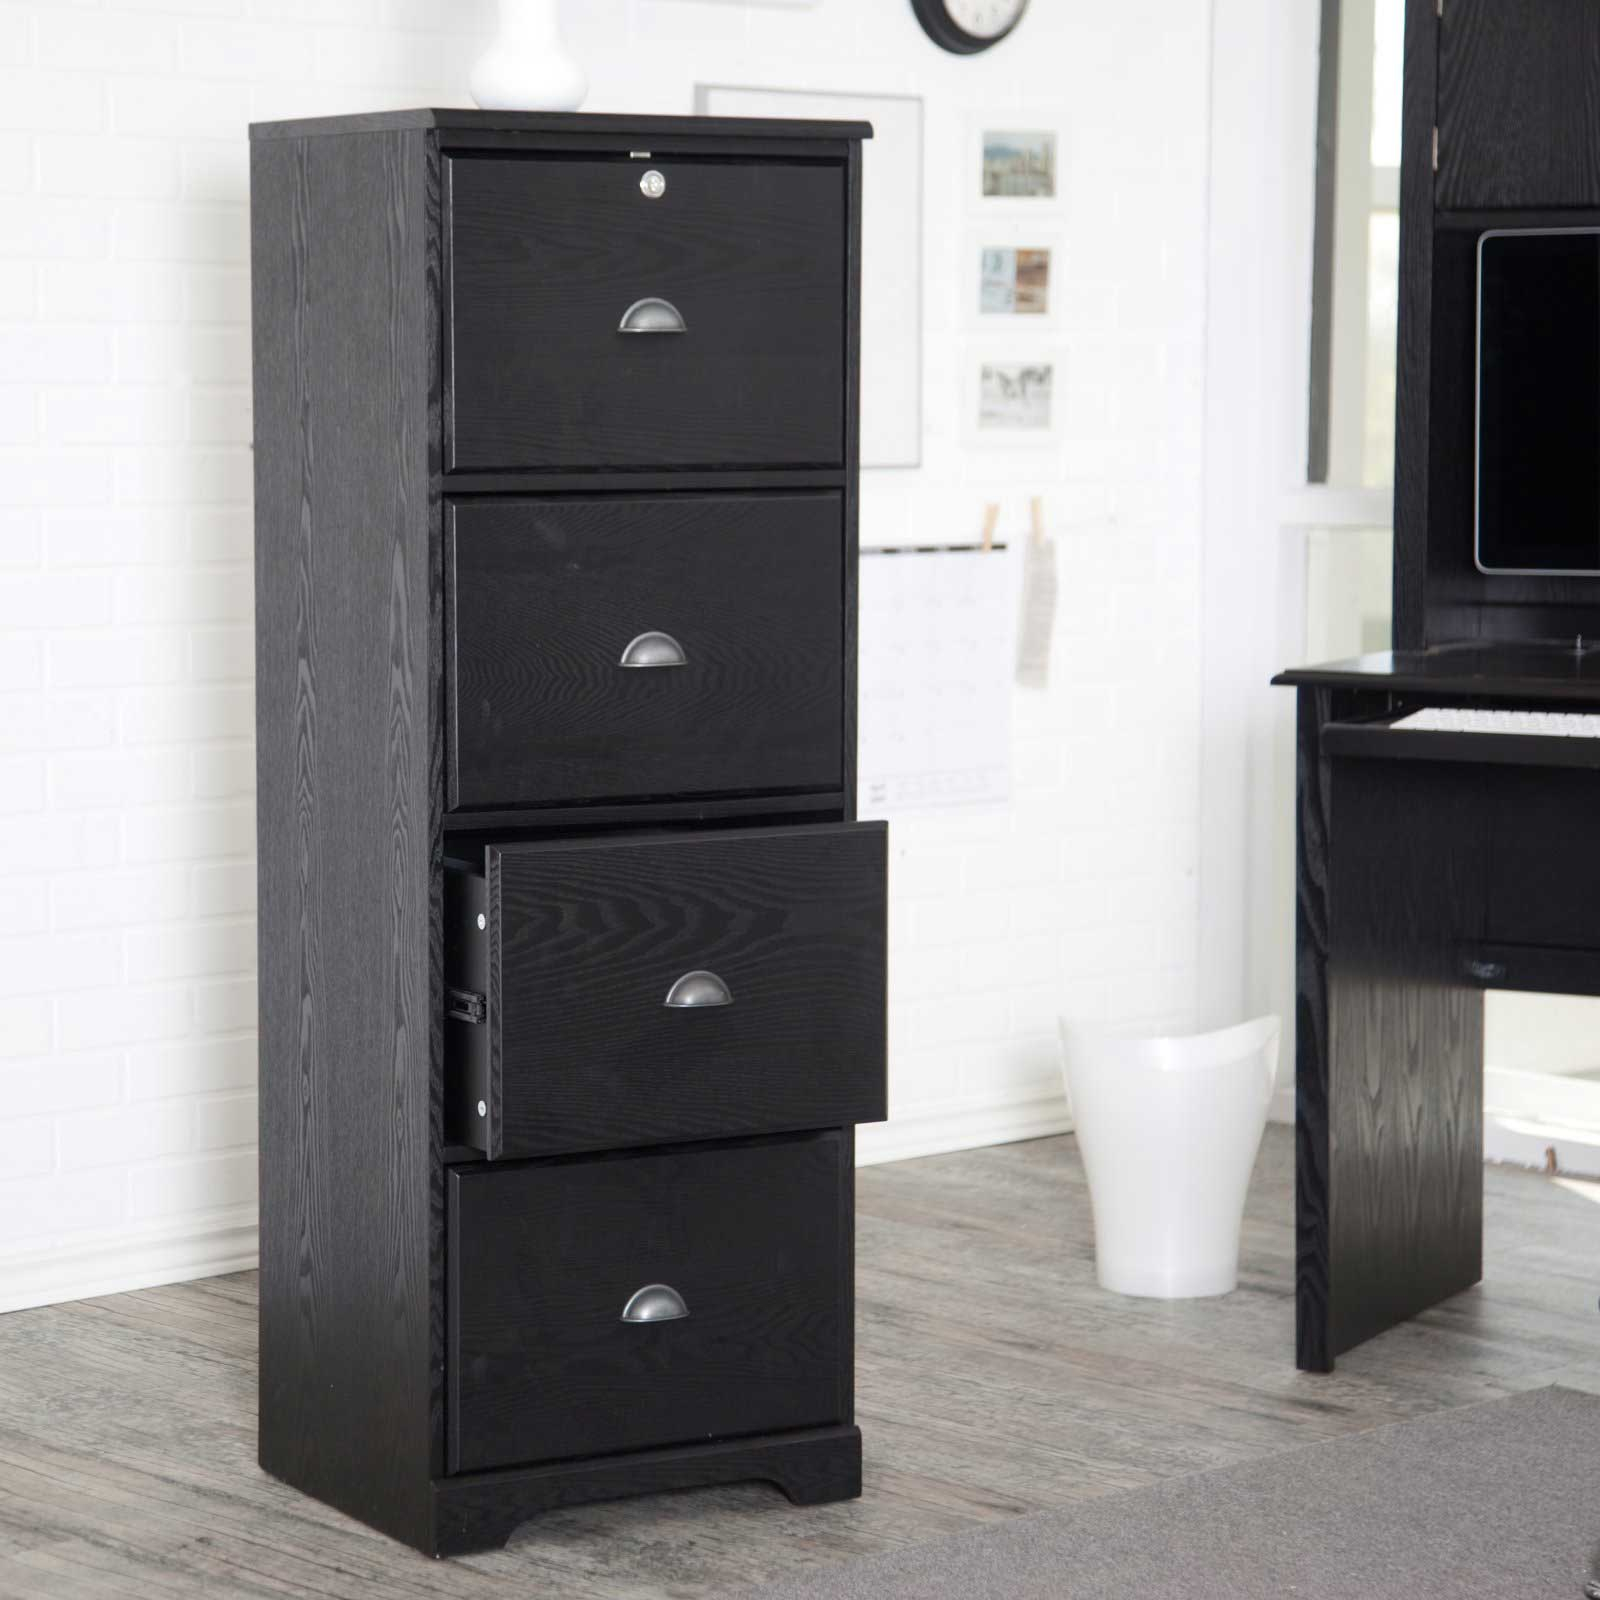 Vertical Filing Cabinets For Home Office intended for dimensions 1600 X 1600